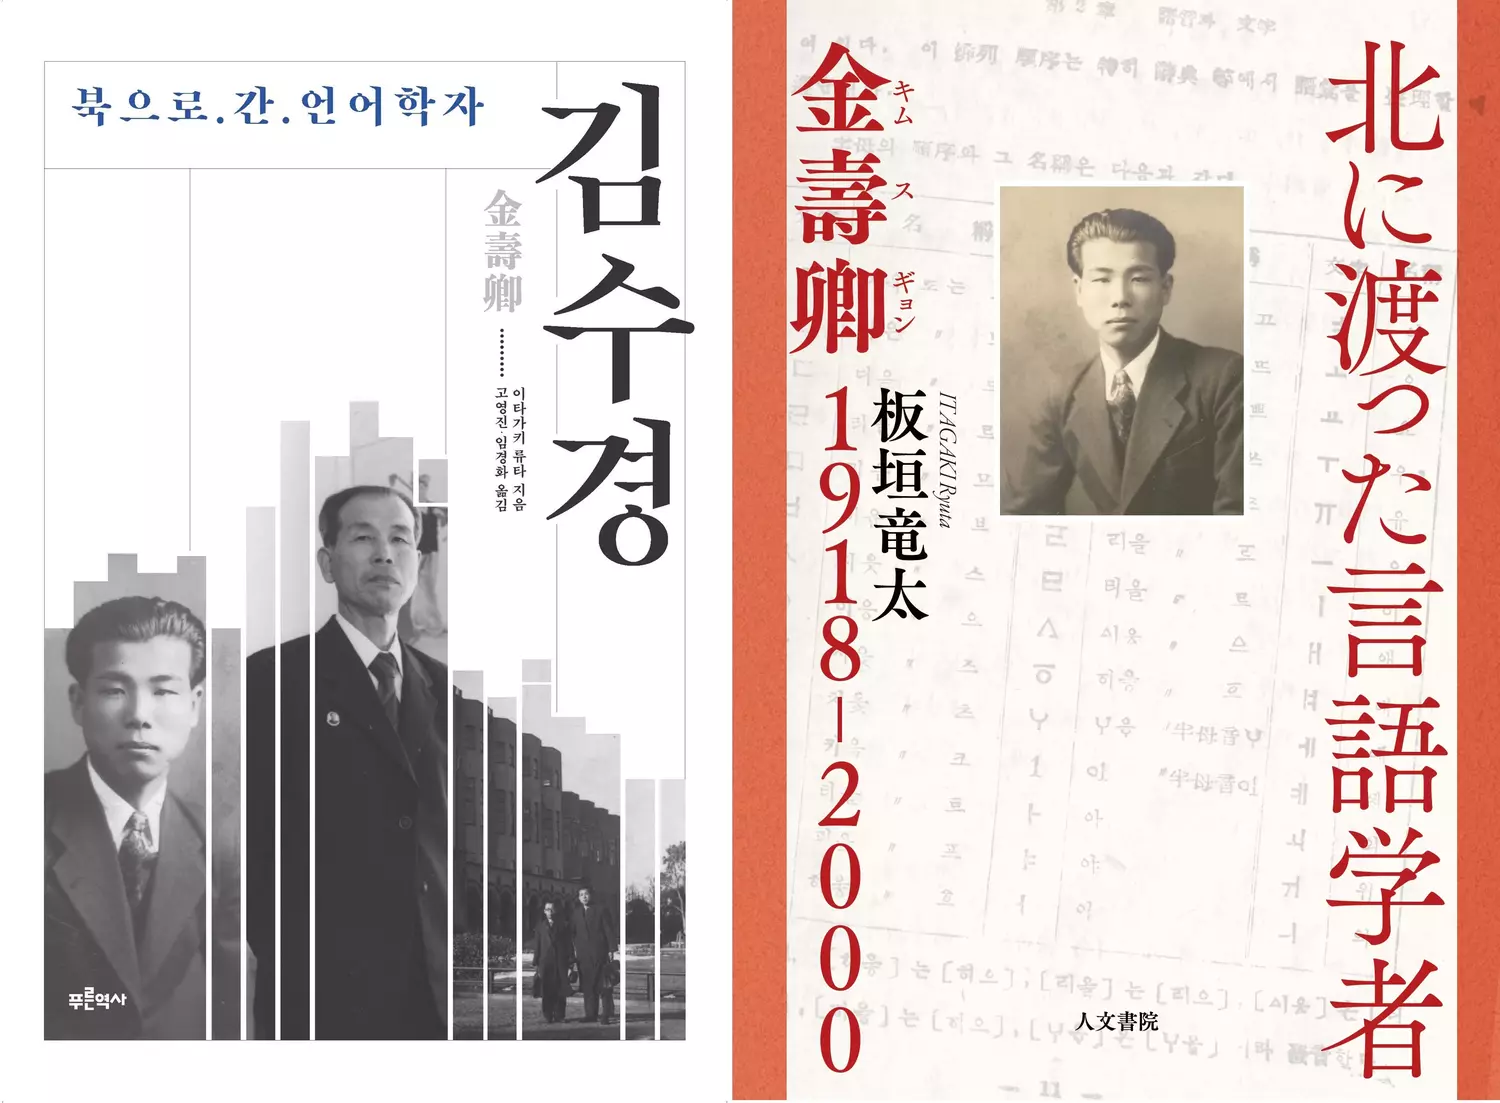 Cover of the book-length biography of Kim Soo-Gyong (1918-2000)